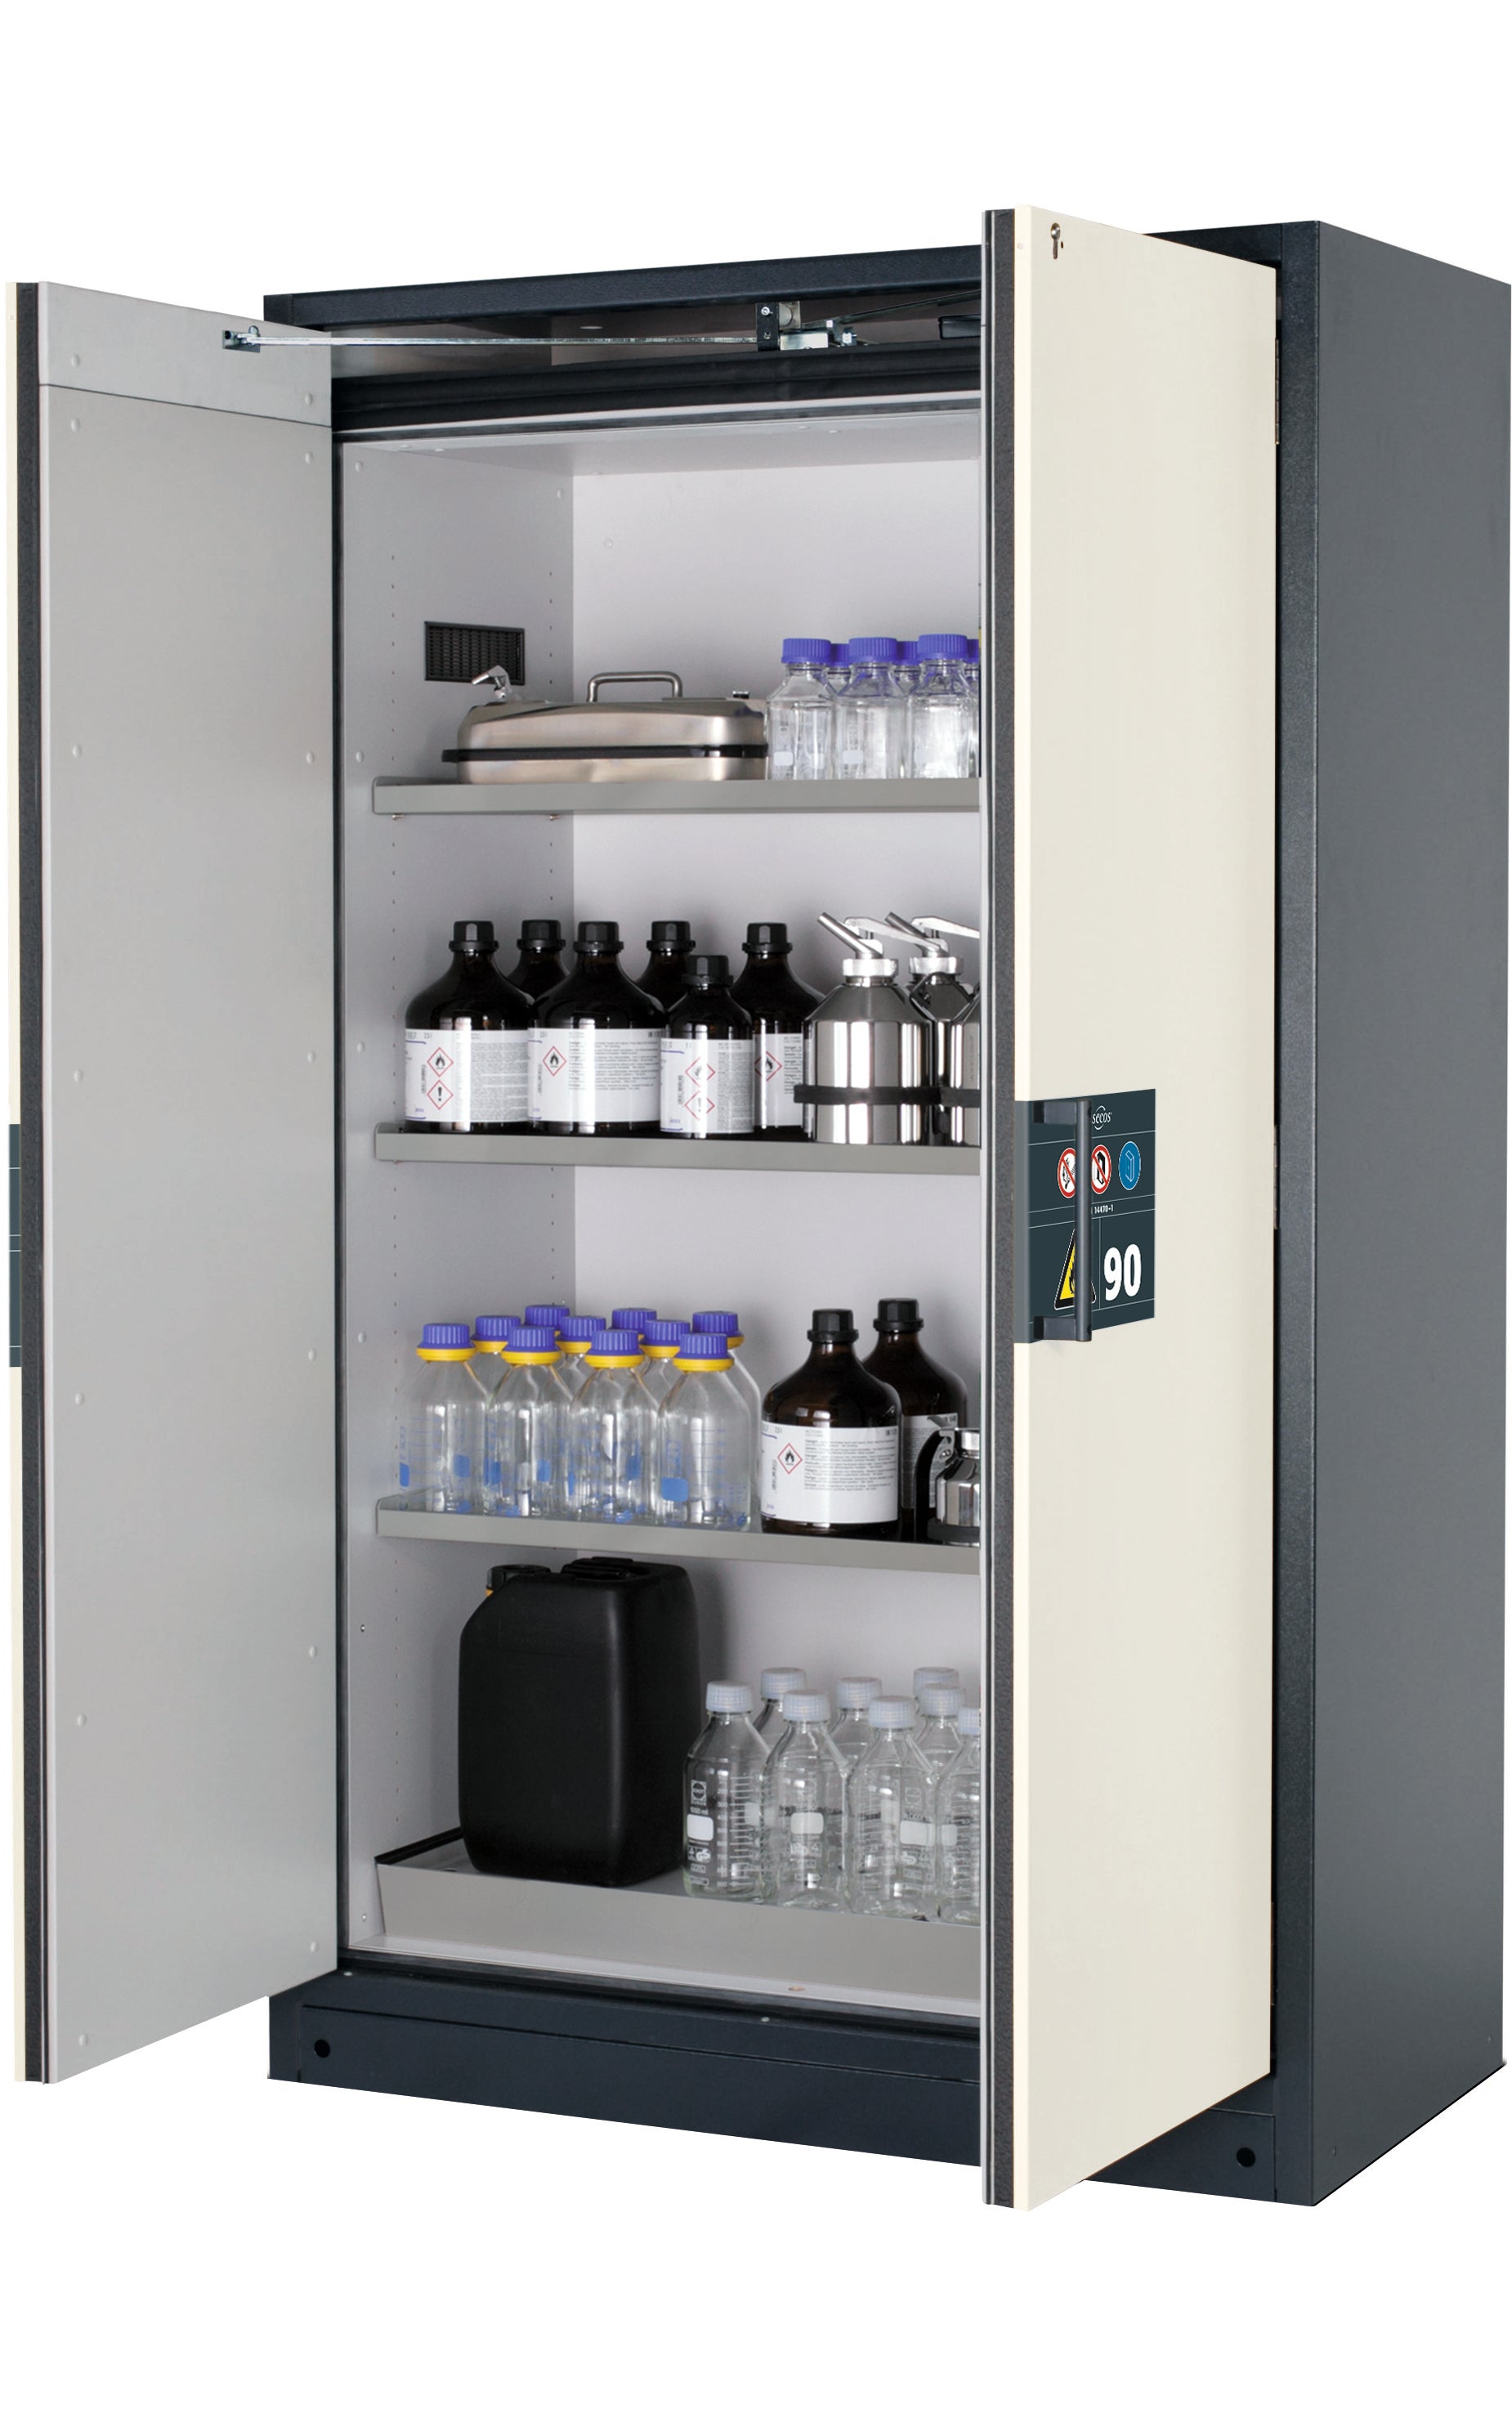 Type 90 safety storage cabinet Q-PEGASUS-90 model Q90.195.120.WDAC in pure white RAL 9010 with 3x shelf standard (stainless steel 1.4301),